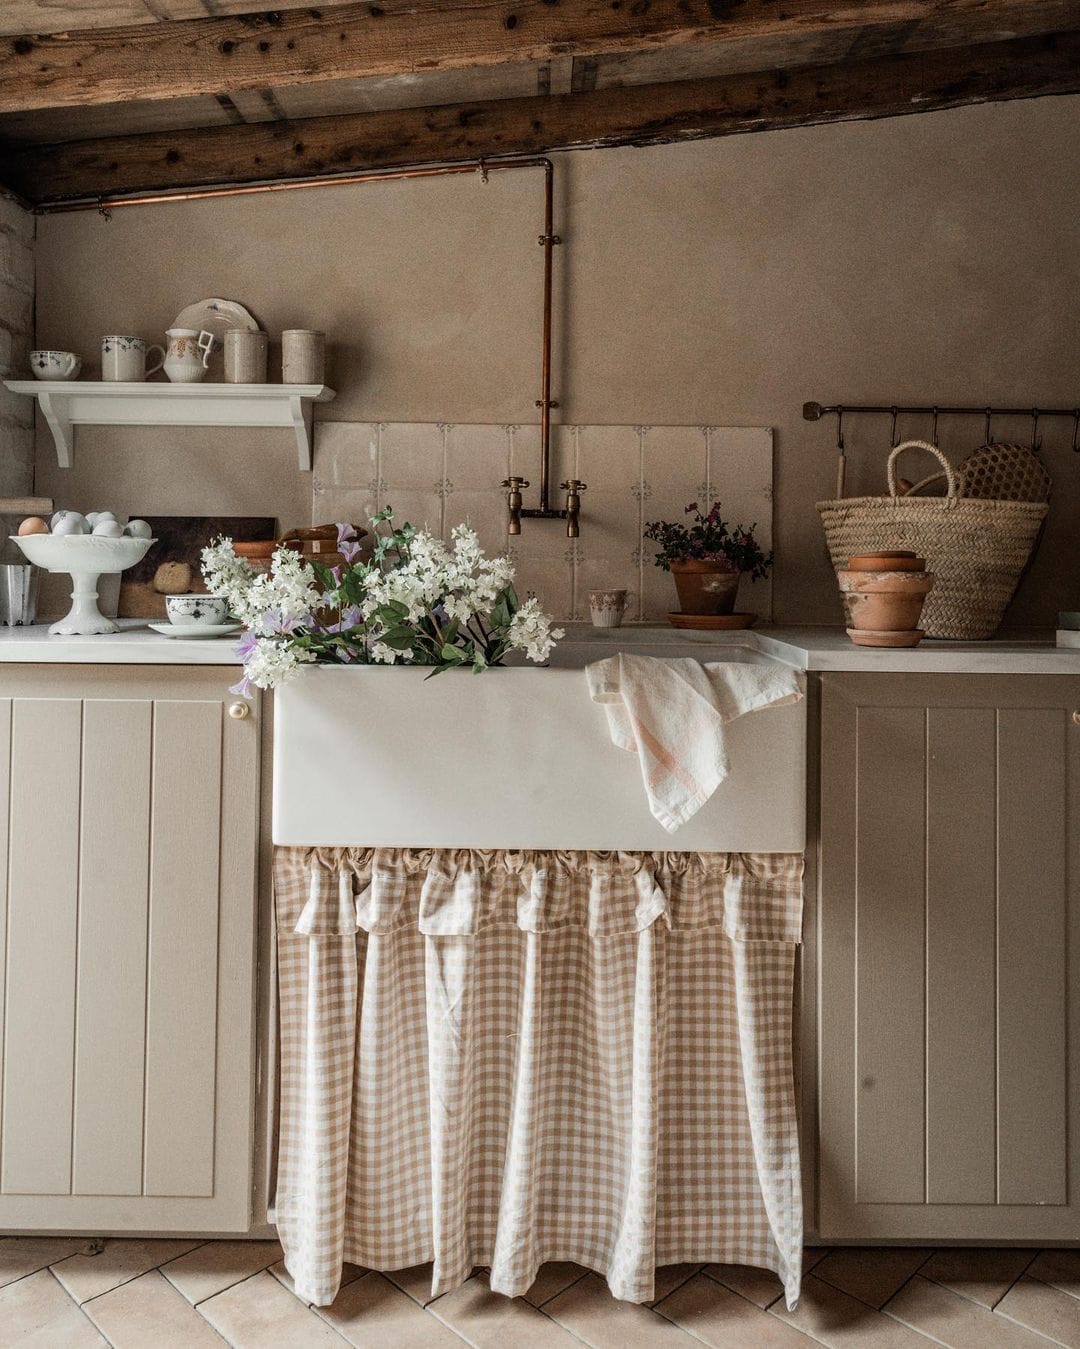 cottage style kitchen featured as a example of old homes timeless charm